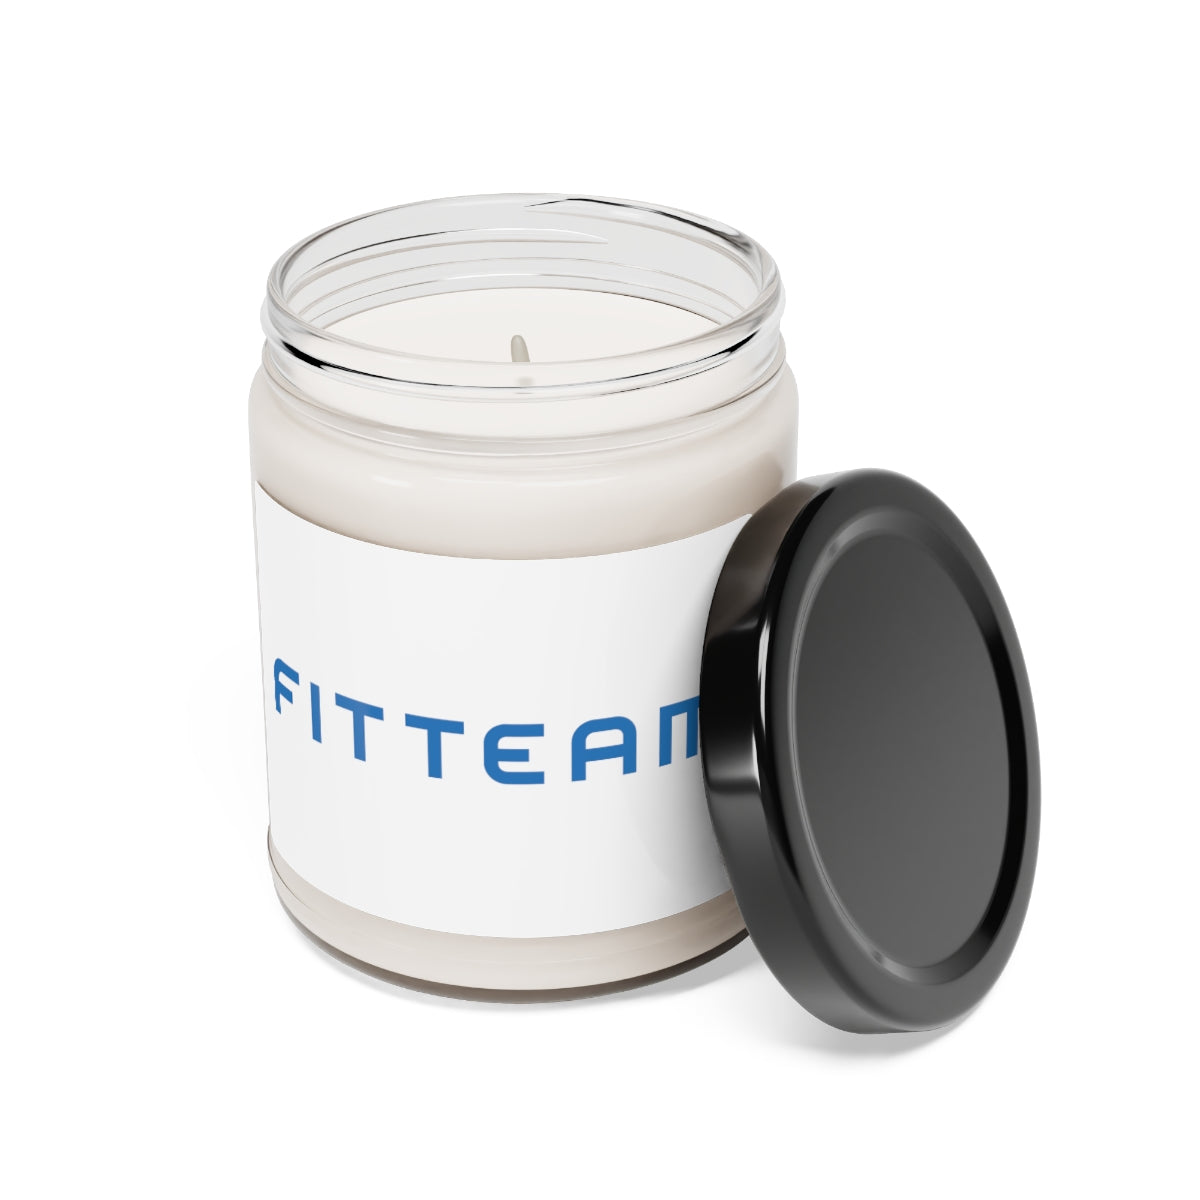 FITTEAM Scented Soy Candle, 9oz